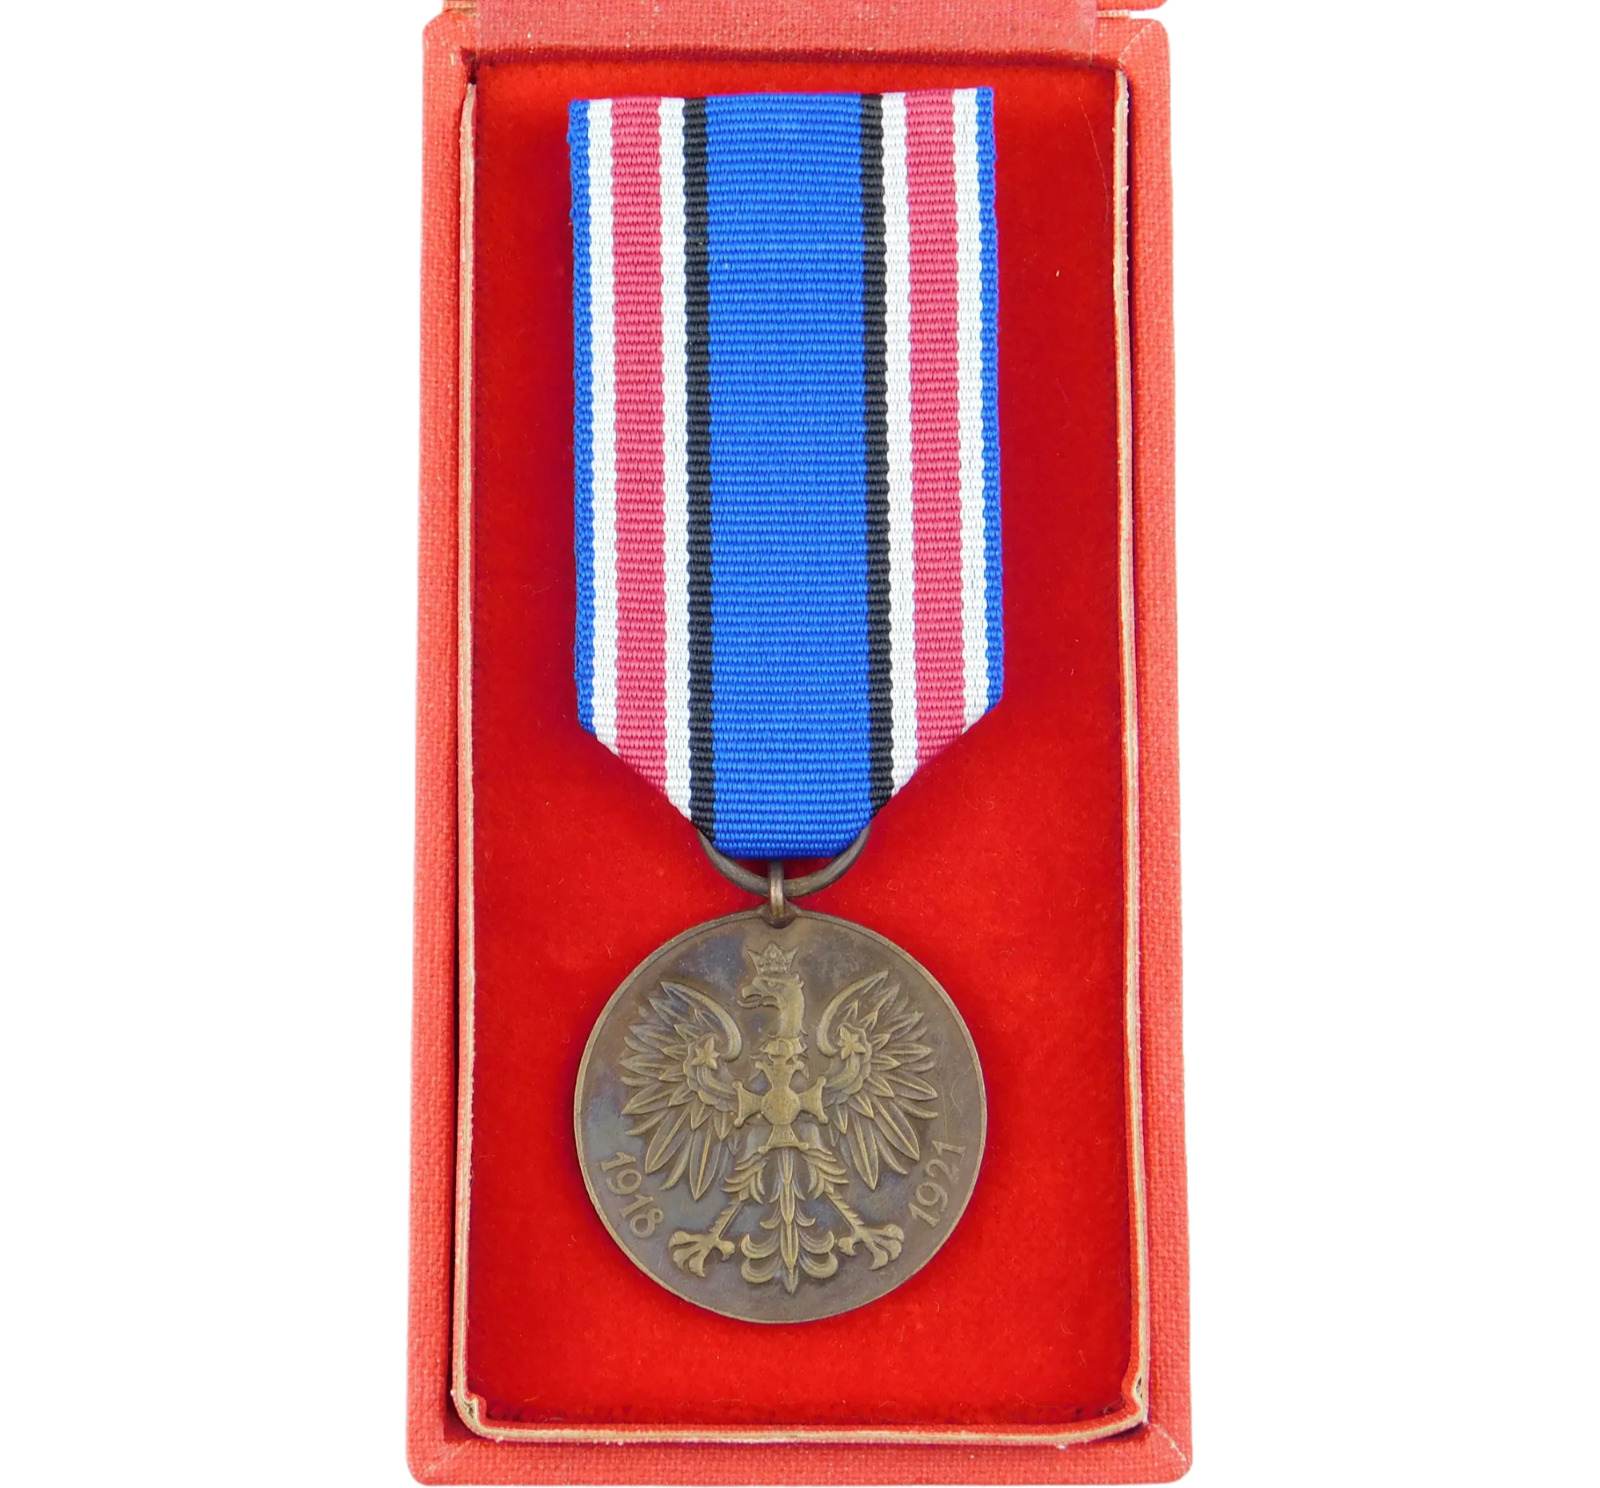 3018 WW1 POLISH MEDAL FOR THE WAR 1918–1921 - POLAND TO IT DEFENDER